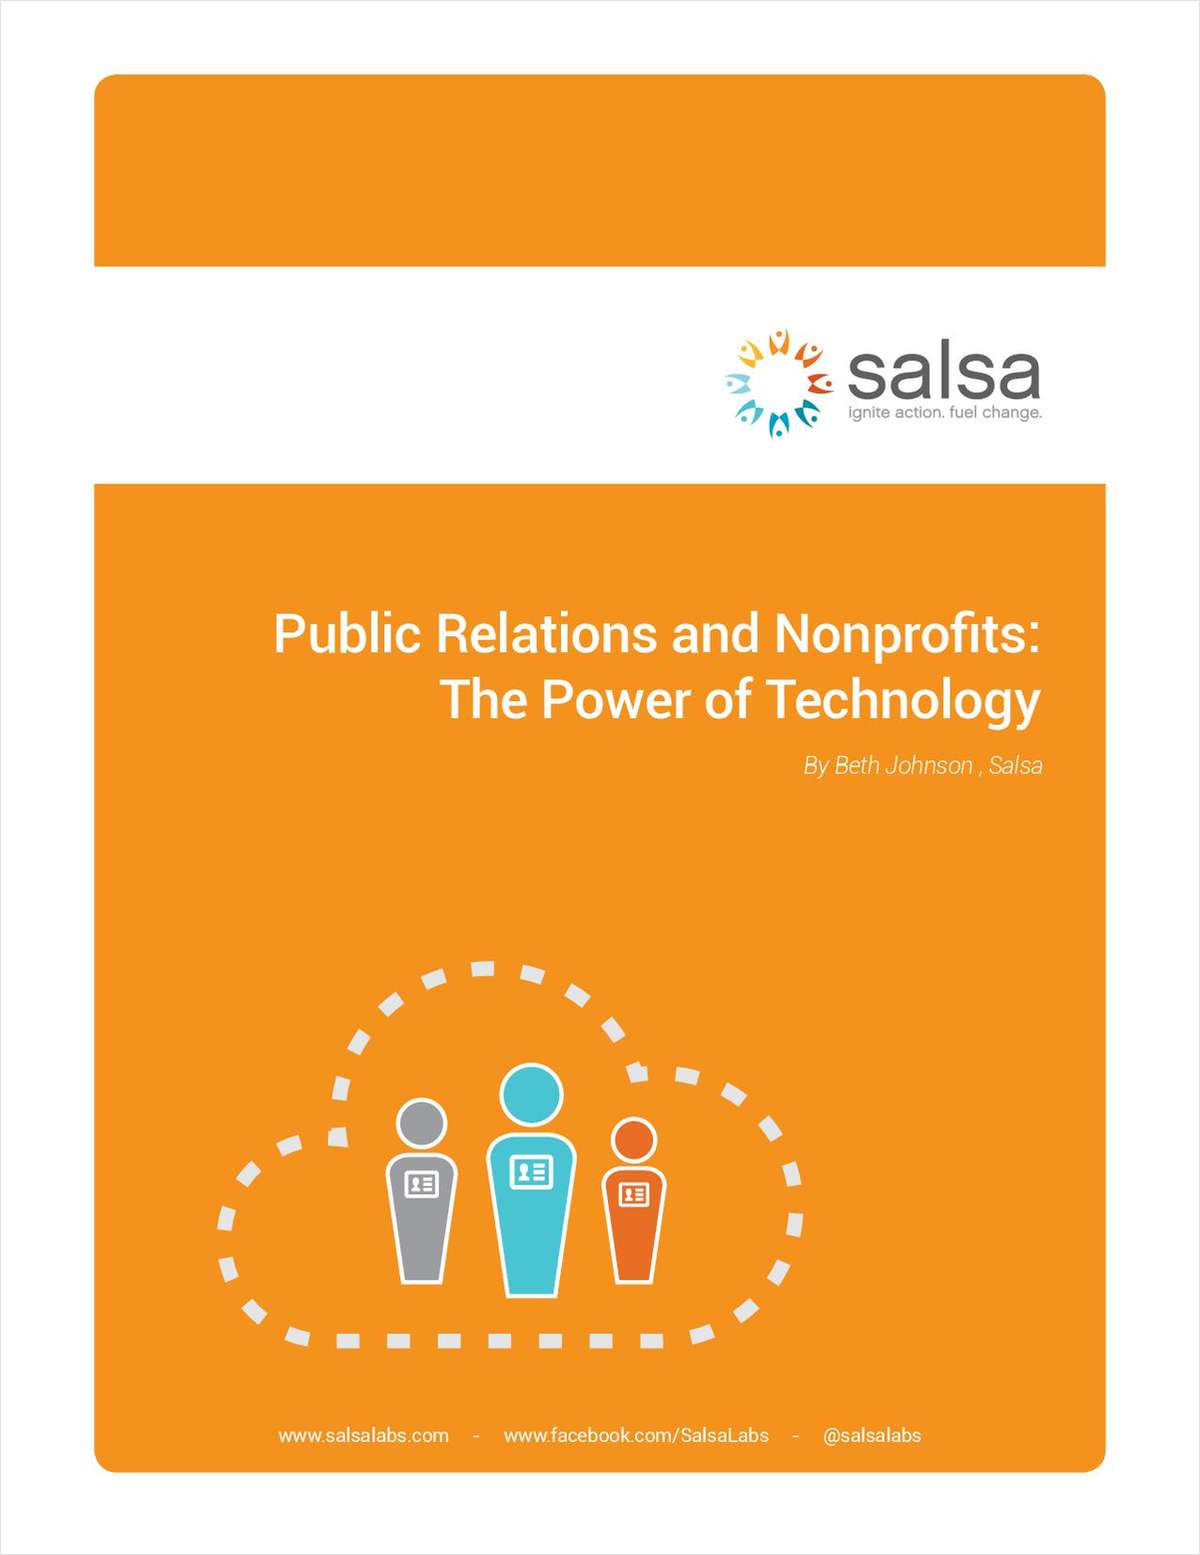 Public Relations and Nonprofits: The Power of Technology